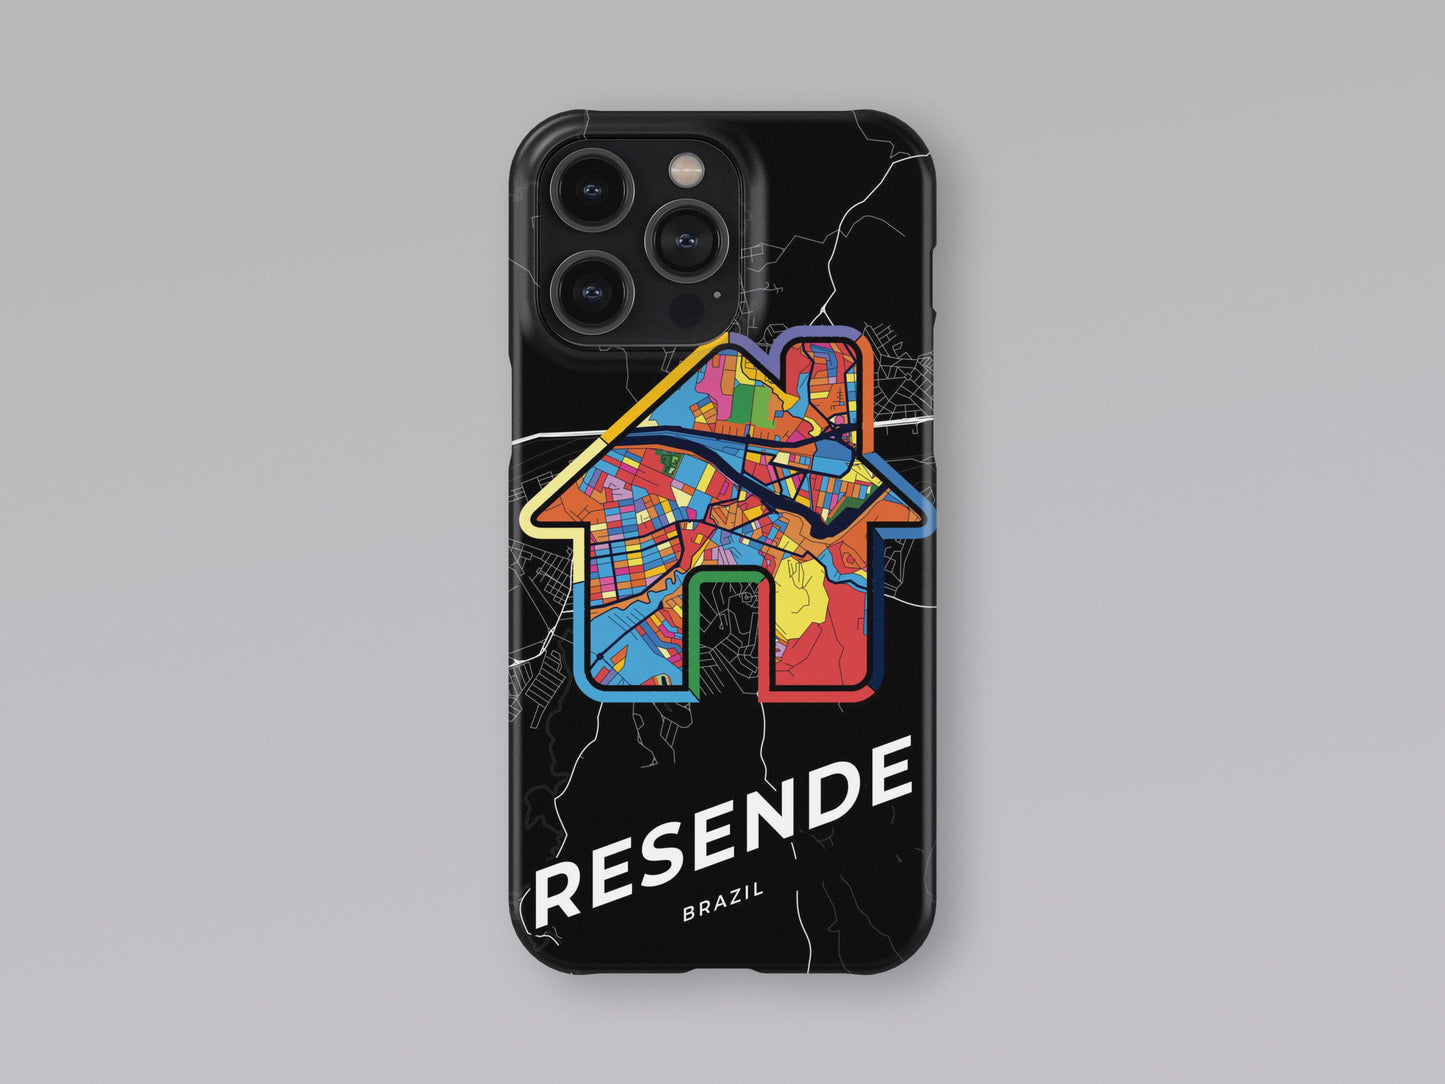 Resende Brazil slim phone case with colorful icon. Birthday, wedding or housewarming gift. Couple match cases. 3